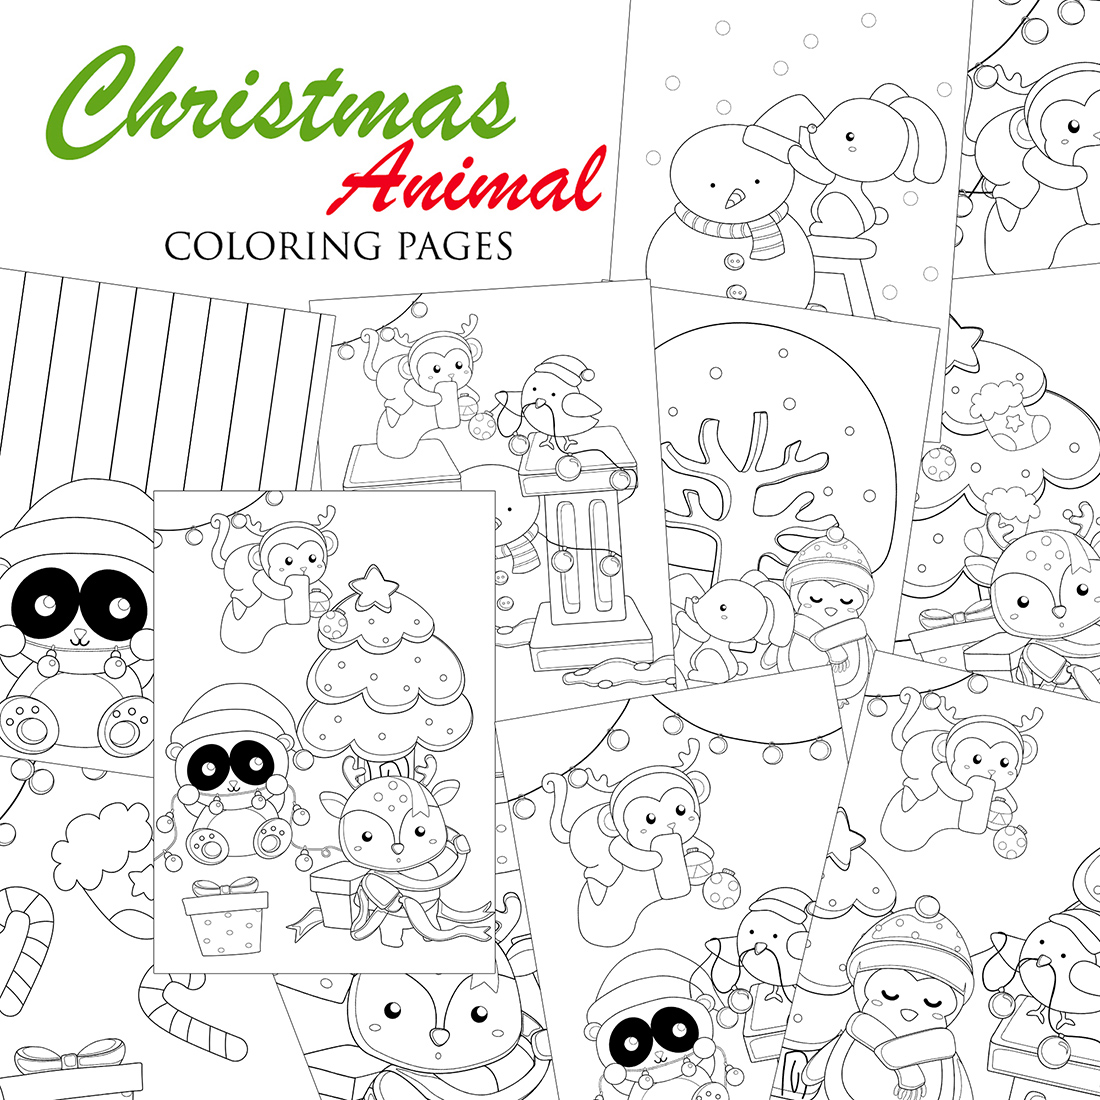 Christmas Animals Forest Bird Penguin Rabbit Panda Deer Monkey Winter Snowman Holiday Cartoon Coloring Pages for Kids and Adult cover image.